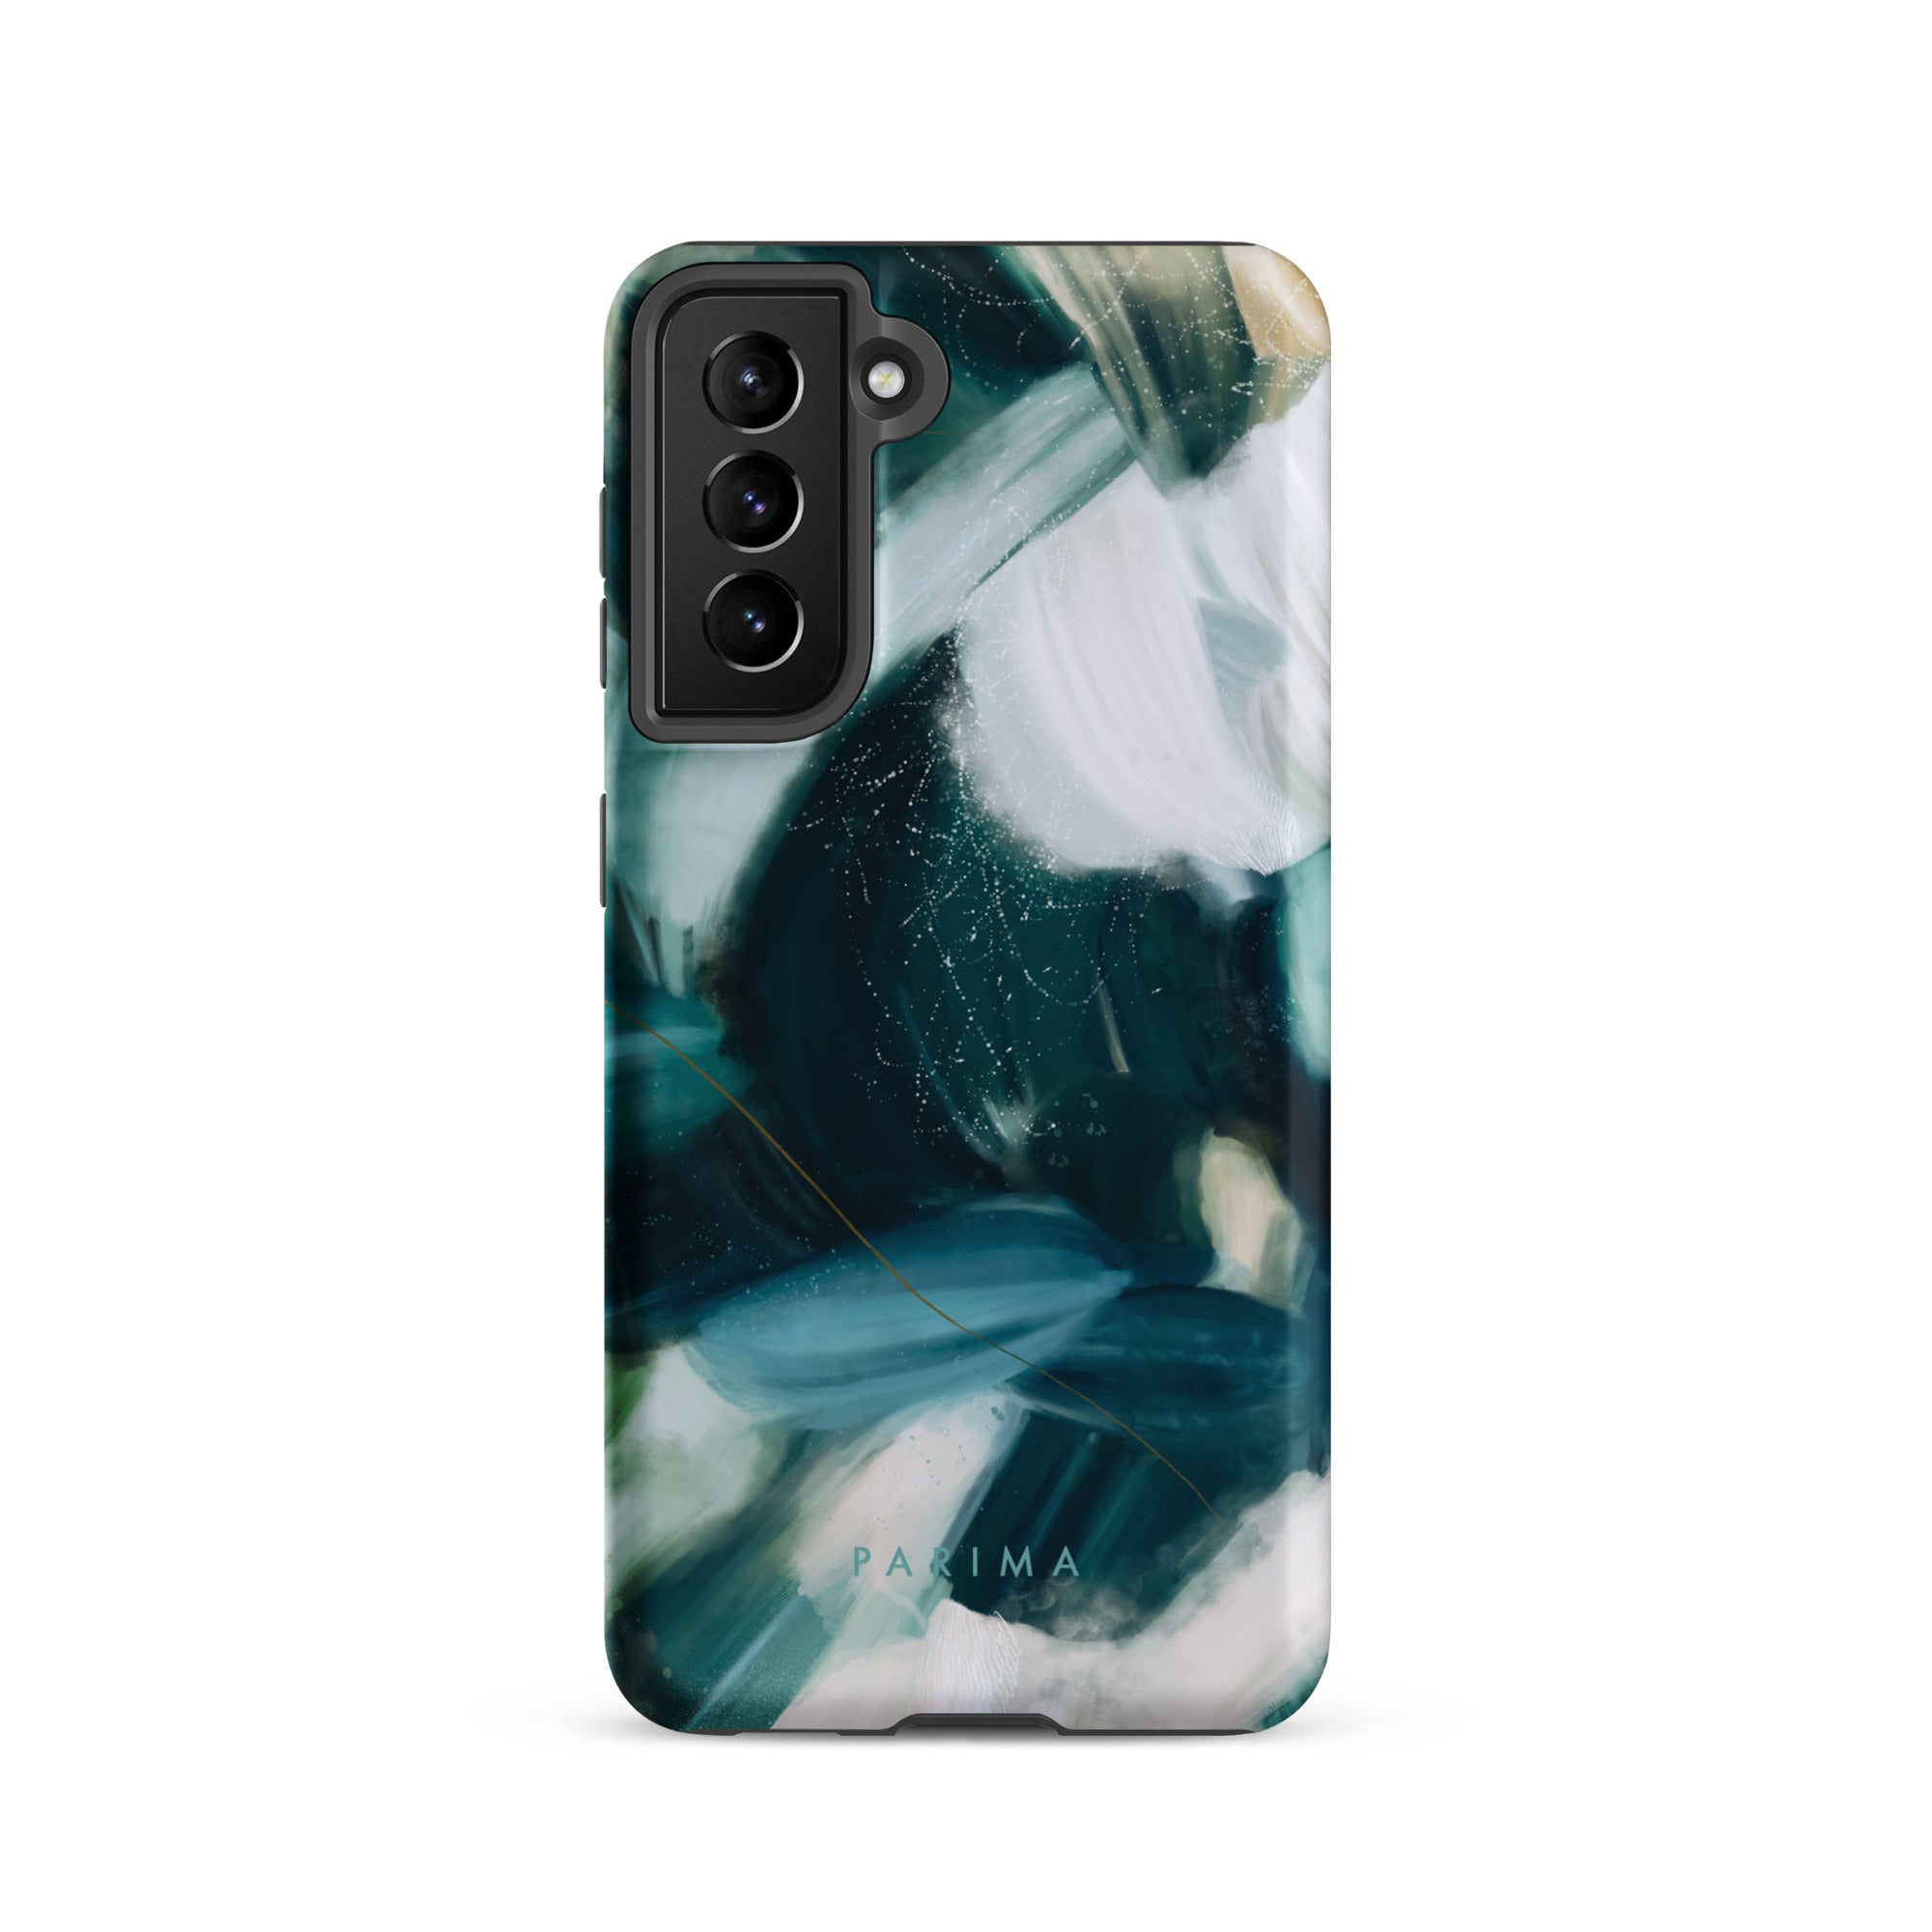 Caspian, blue and teal abstract art on Samsung Galaxy S21 tough case by Parima Studio